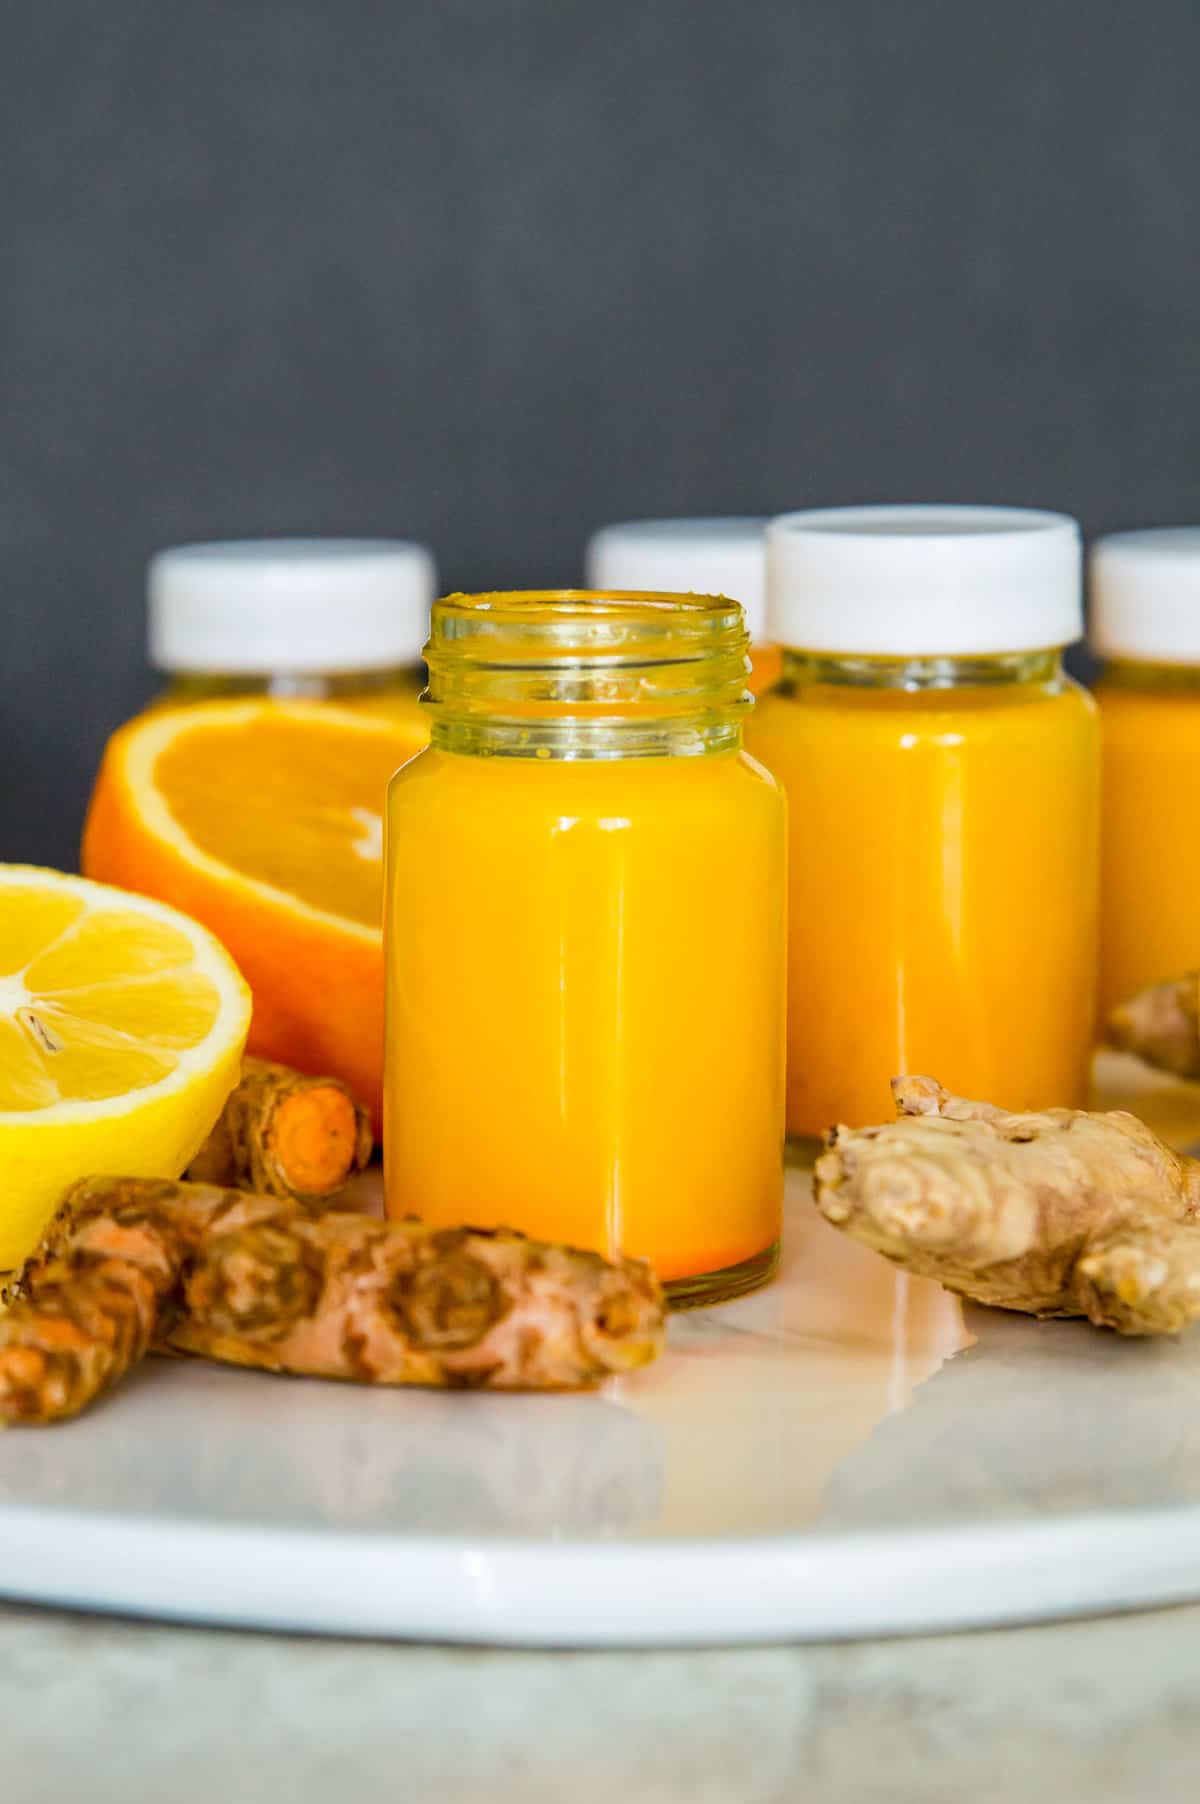 Small glass bottles filled with an orange liquid surrounded by fresh ginger, turmeric, orange slices and lemon slices.